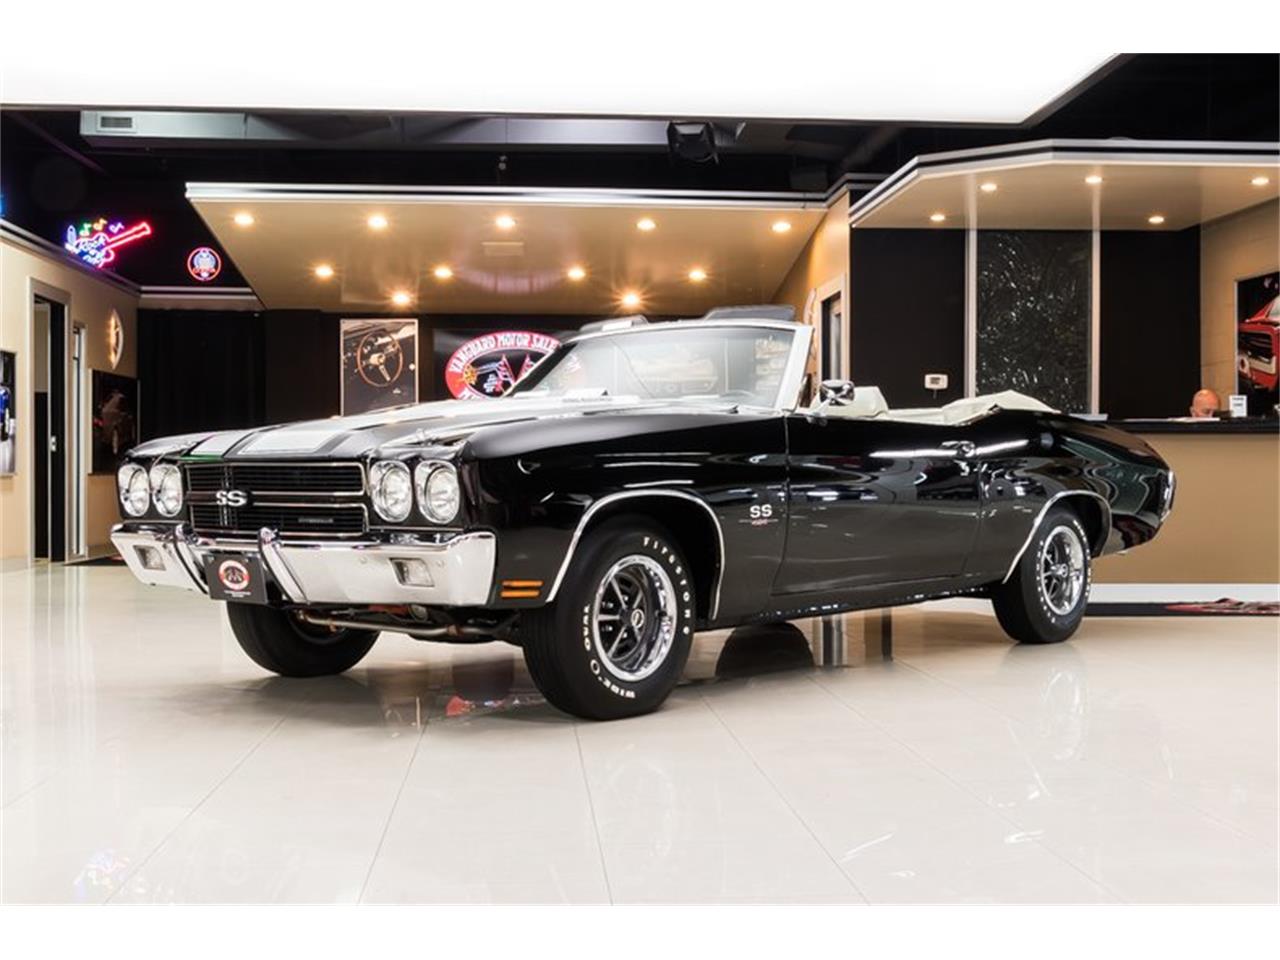 1970 Chevrolet Chevelle for sale in Plymouth, MI